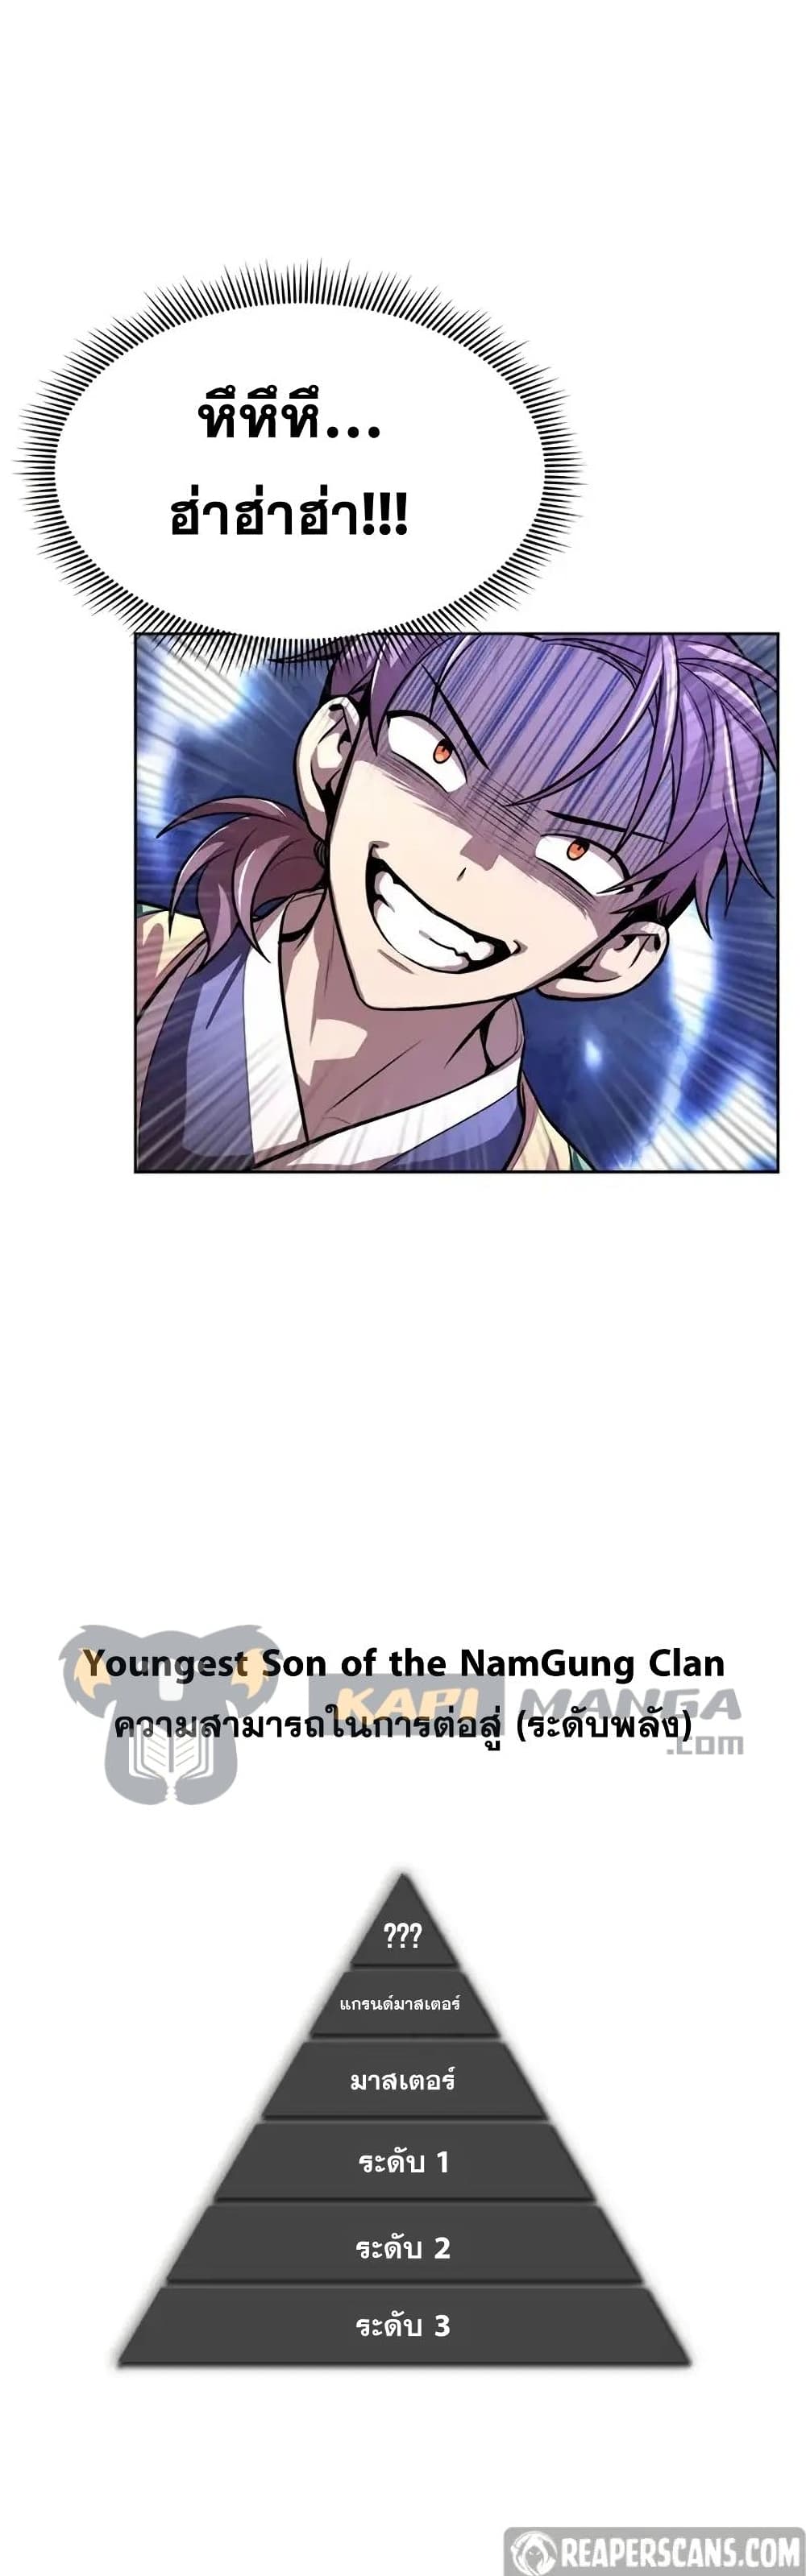 Youngest Son of the NamGung Clan 5-5